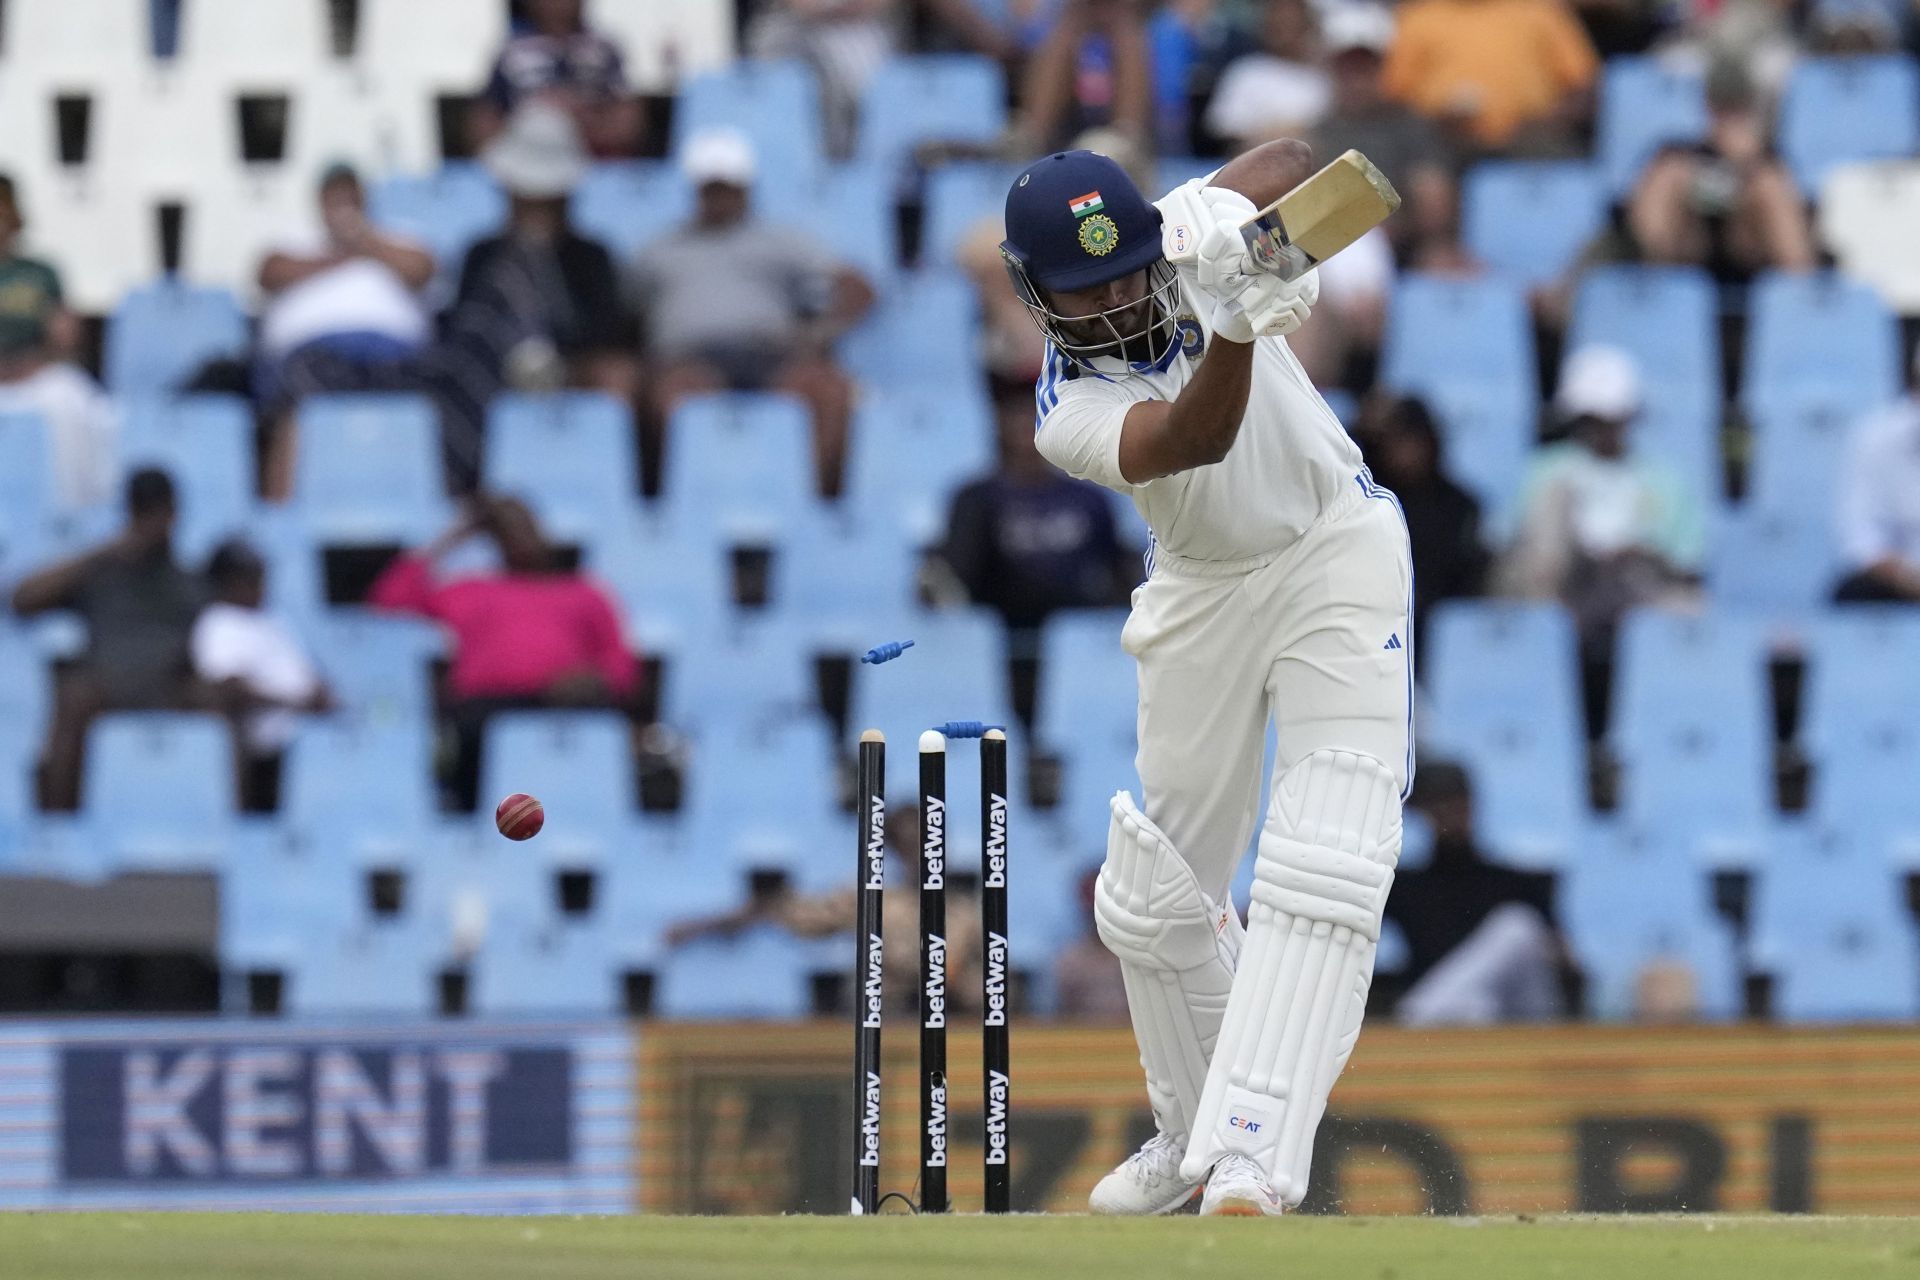 Shreyas Iyer was bowled in both innings of the Centurion Test. [P/C: AP]